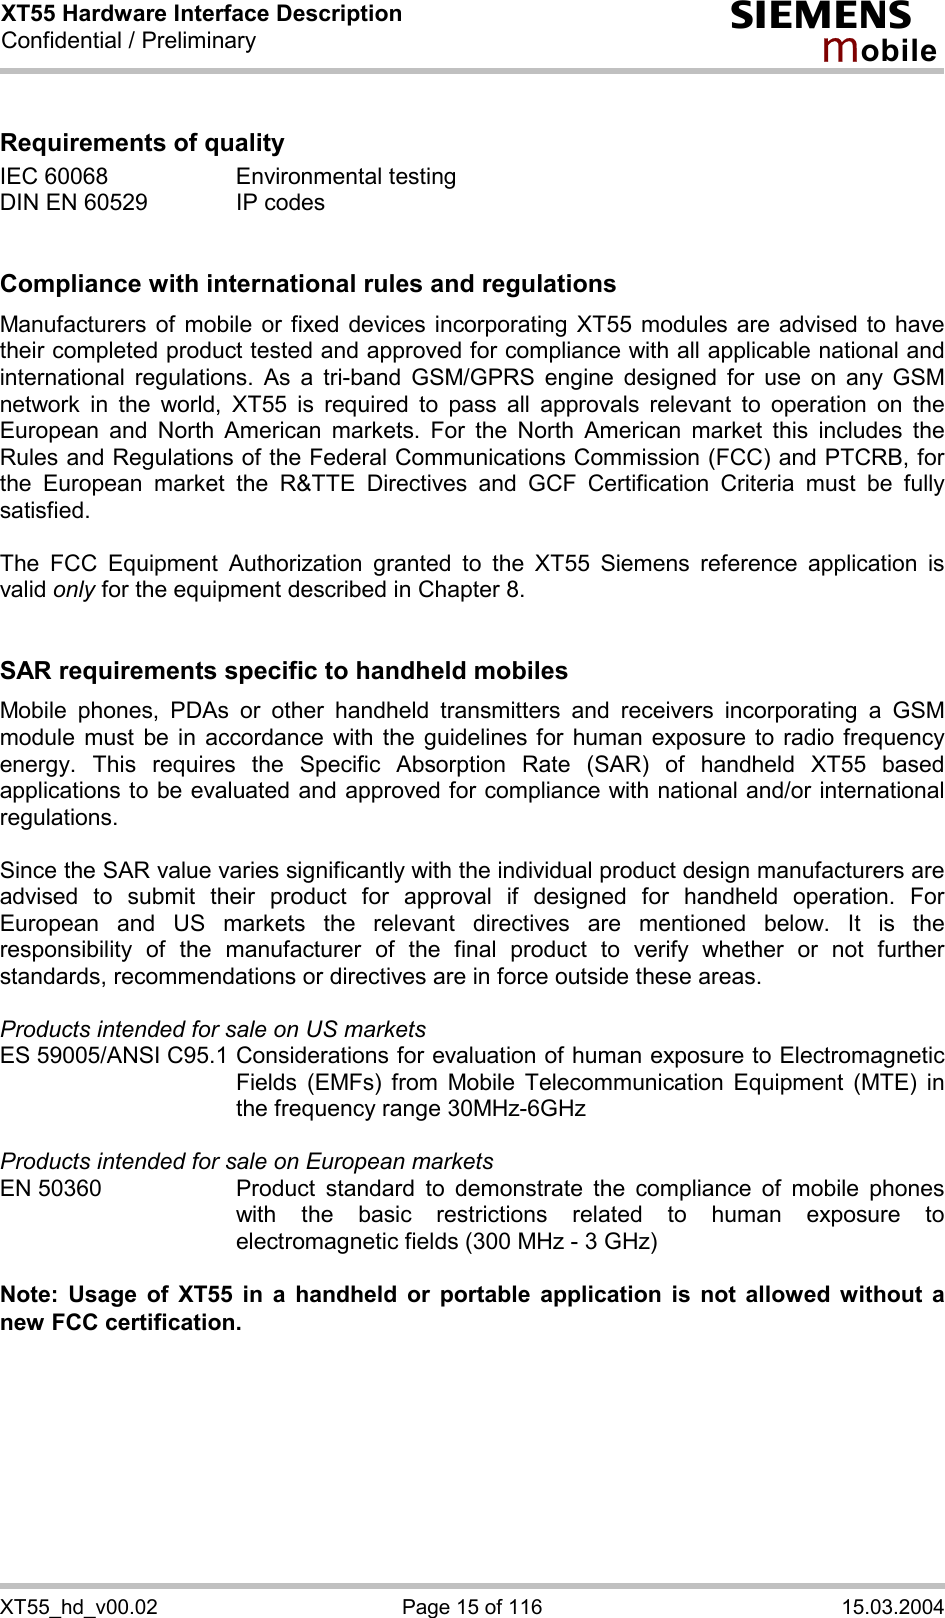 XT55 Hardware Interface Description Confidential / Preliminary s mo b i l e XT55_hd_v00.02  Page 15 of 116  15.03.2004  Requirements of quality IEC 60068  Environmental testing DIN EN 60529  IP codes   Compliance with international rules and regulations Manufacturers of mobile or fixed devices incorporating XT55 modules are advised to have their completed product tested and approved for compliance with all applicable national and international regulations. As a tri-band GSM/GPRS engine designed for use on any GSM network in the world, XT55 is required to pass all approvals relevant to operation on the European and North American markets. For the North American market this includes the Rules and Regulations of the Federal Communications Commission (FCC) and PTCRB, for the European market the R&amp;TTE Directives and GCF Certification Criteria must be fully satisfied.  The FCC Equipment Authorization granted to the XT55 Siemens reference application is valid only for the equipment described in Chapter 8.   SAR requirements specific to handheld mobiles Mobile phones, PDAs or other handheld transmitters and receivers incorporating a GSM module must be in accordance with the guidelines for human exposure to radio frequency energy. This requires the Specific Absorption Rate (SAR) of handheld XT55 based applications to be evaluated and approved for compliance with national and/or international regulations.   Since the SAR value varies significantly with the individual product design manufacturers are advised to submit their product for approval if designed for handheld operation. For European and US markets the relevant directives are mentioned below. It is the responsibility of the manufacturer of the final product to verify whether or not further standards, recommendations or directives are in force outside these areas.   Products intended for sale on US markets ES 59005/ANSI C95.1 Considerations for evaluation of human exposure to Electromagnetic Fields (EMFs) from Mobile Telecommunication Equipment (MTE) in the frequency range 30MHz-6GHz   Products intended for sale on European markets EN 50360  Product standard to demonstrate the compliance of mobile phones with the basic restrictions related to human exposure to electromagnetic fields (300 MHz - 3 GHz)  Note: Usage of XT55 in a handheld or portable application is not allowed without a new FCC certification.  